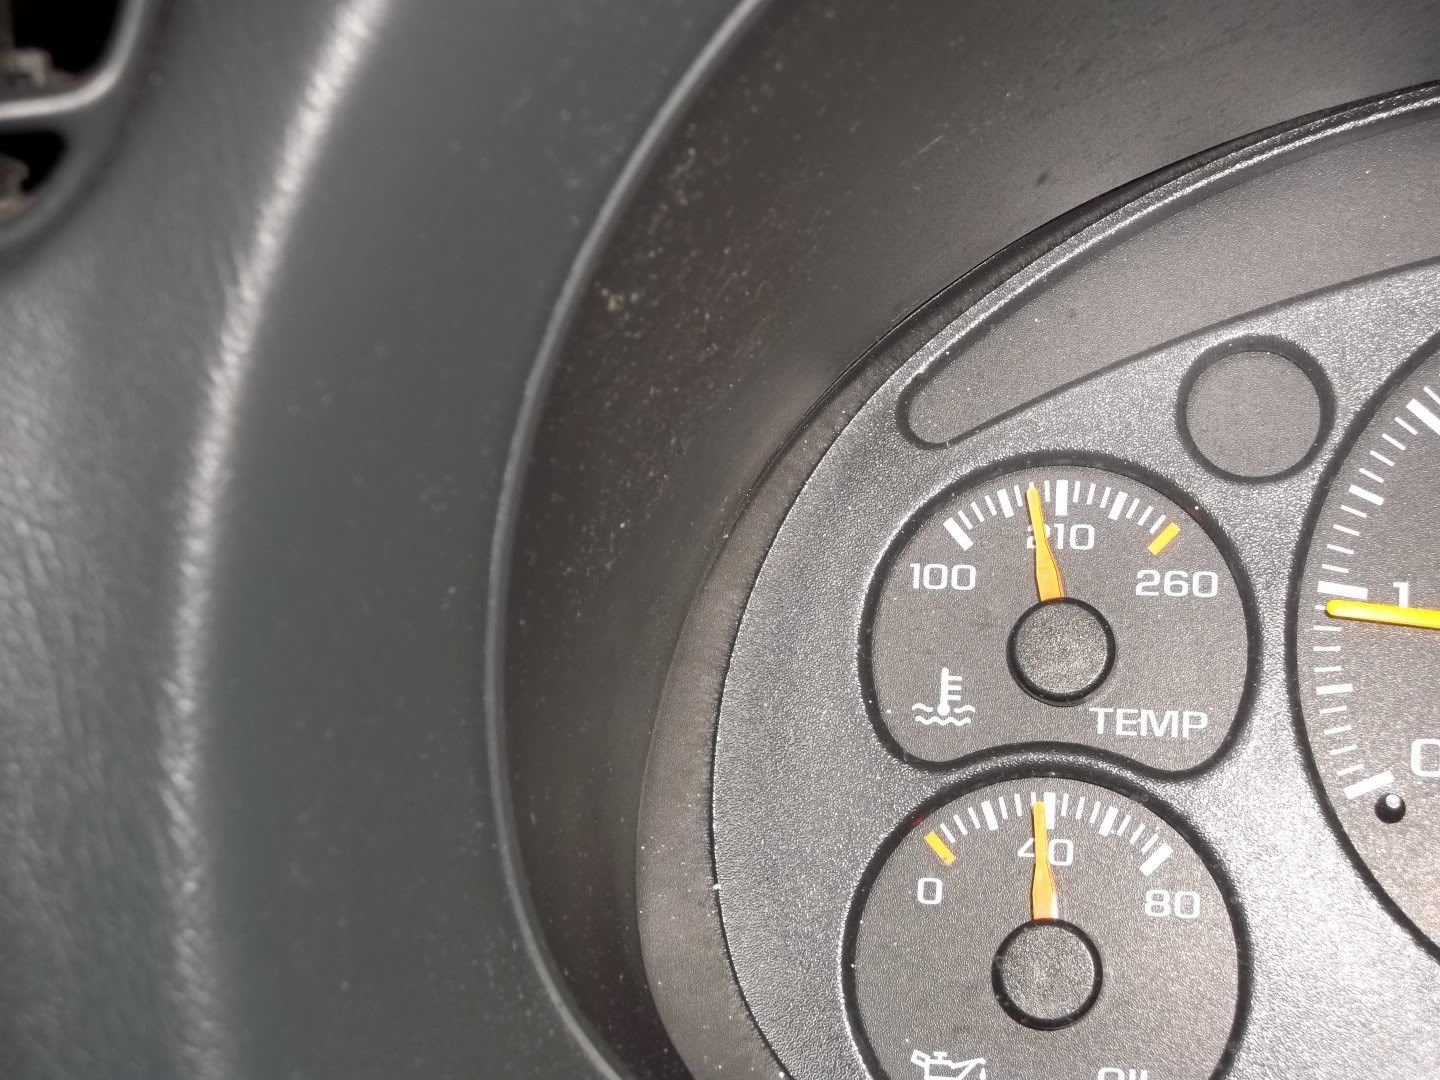 Temp gauge goes up and down honda